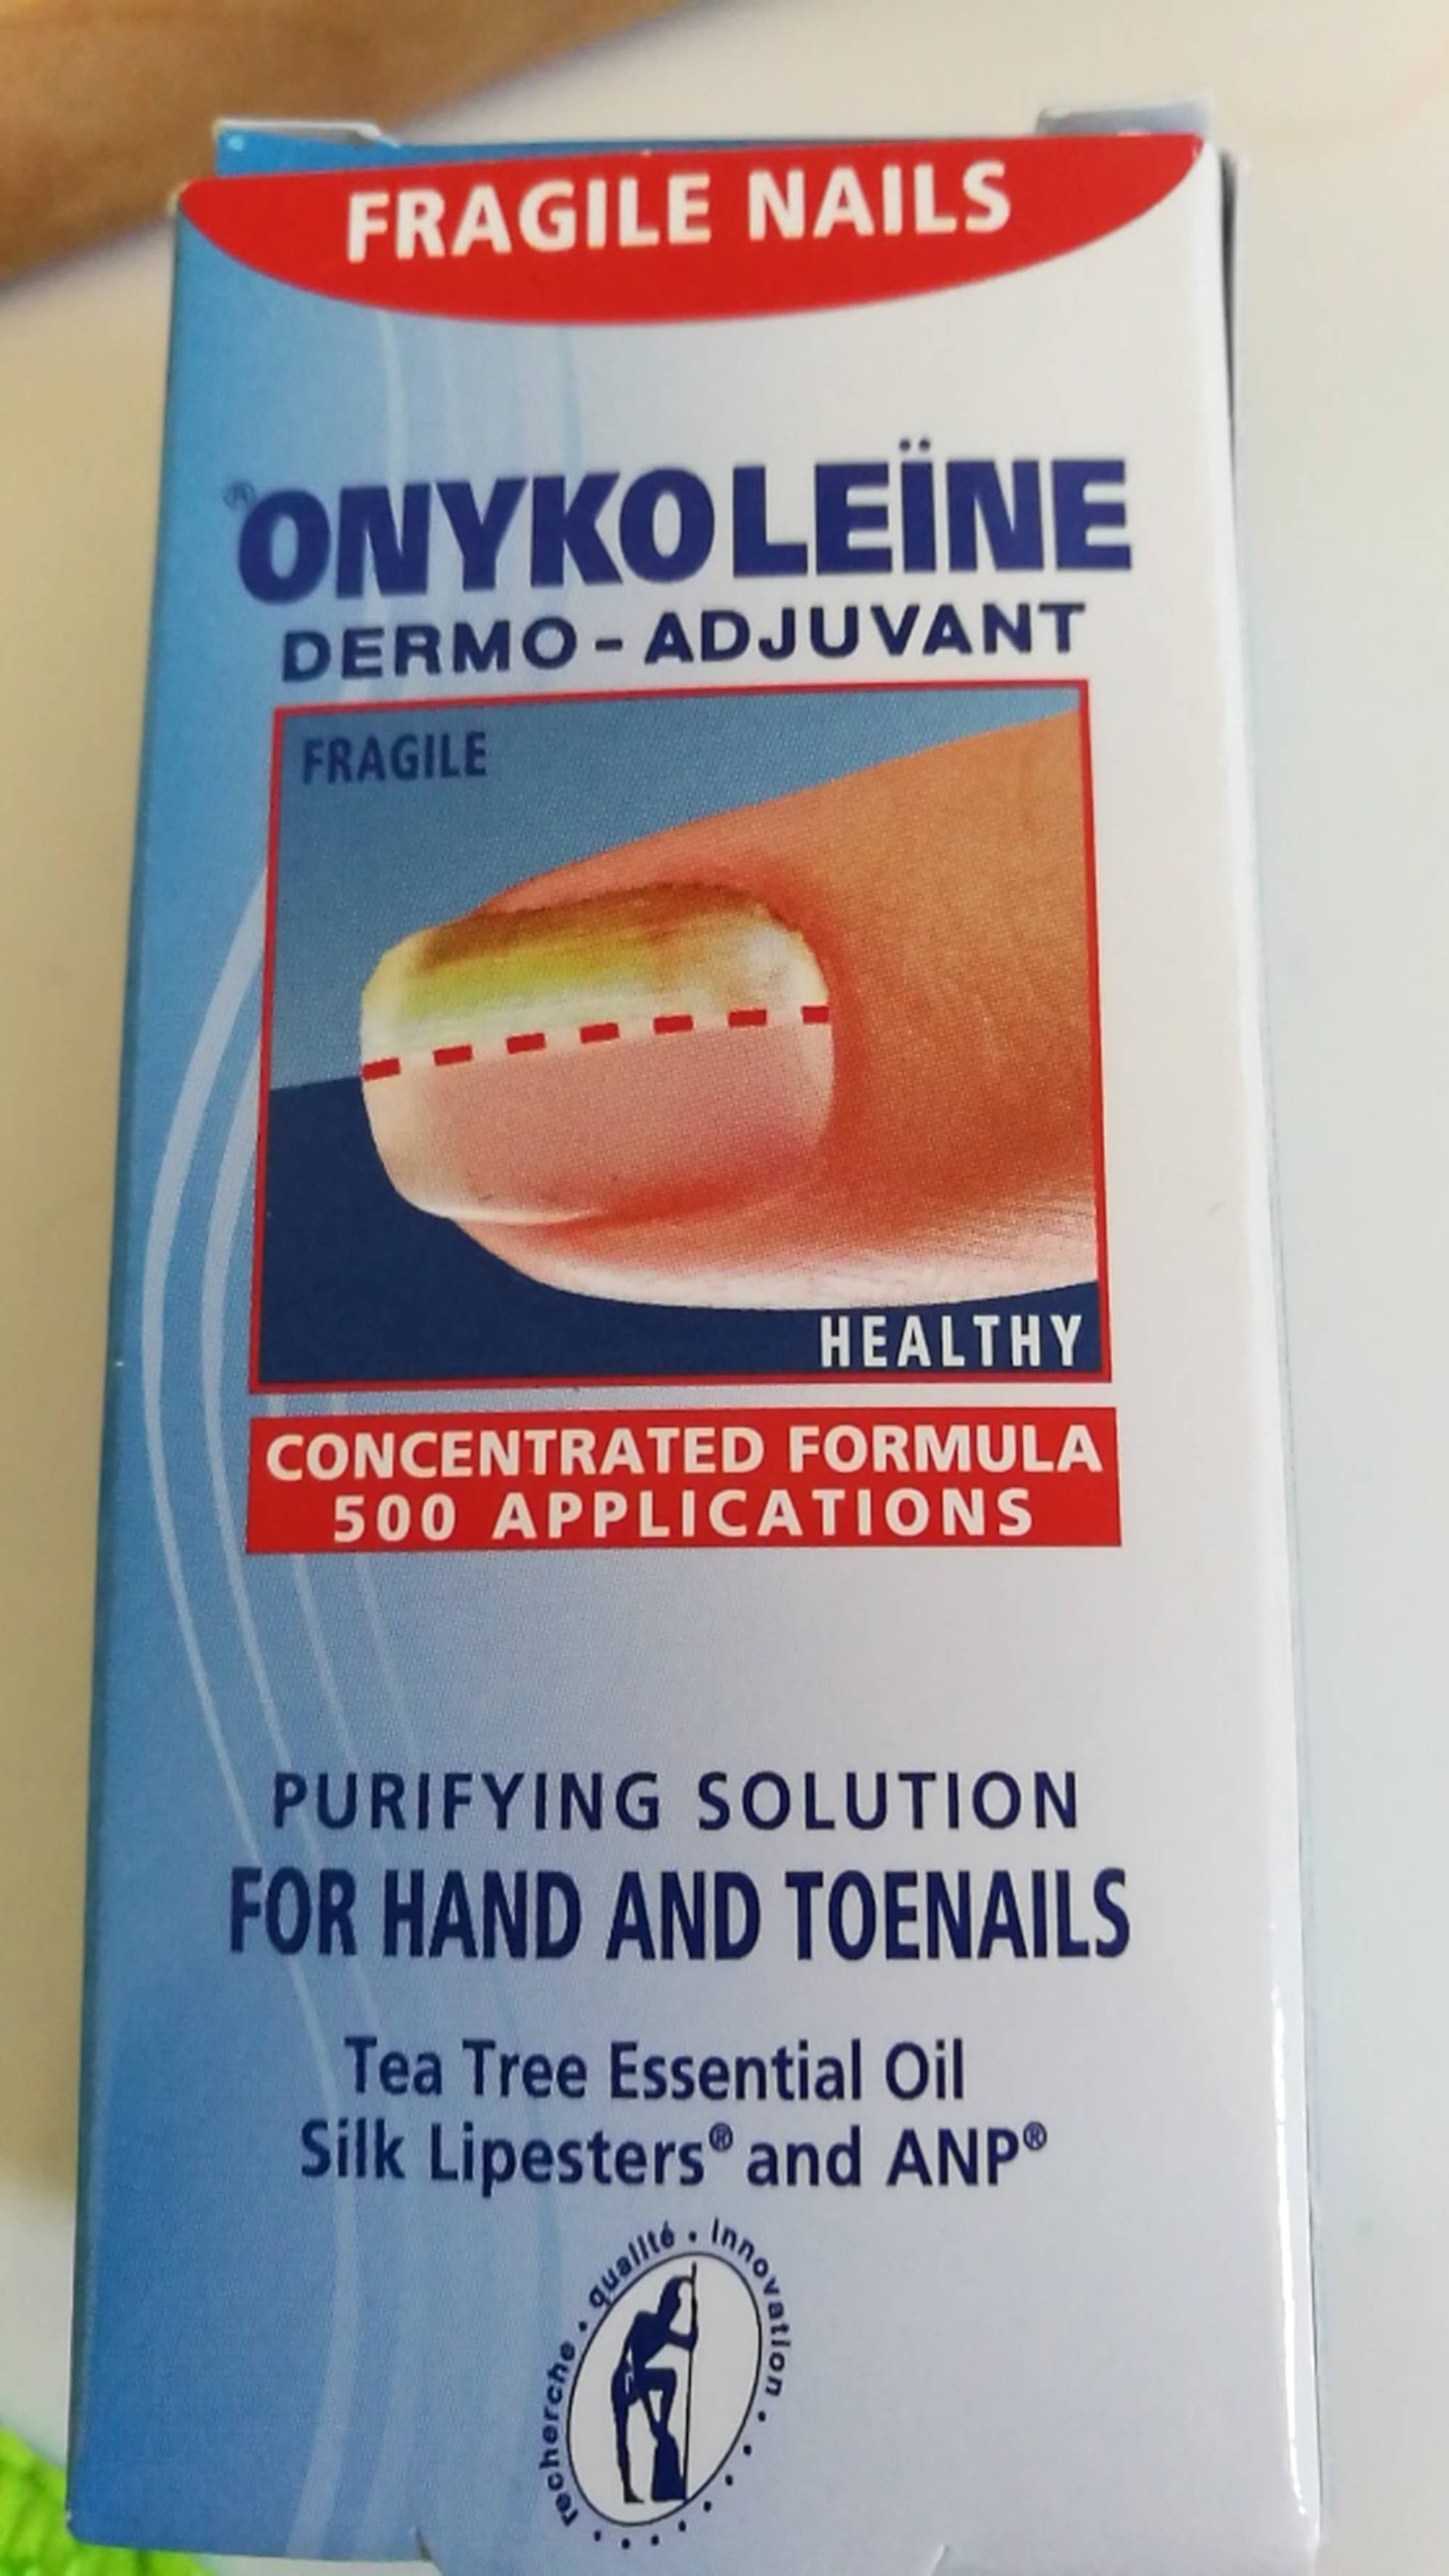 ASEPTA - Onykoleïne dermo-adjuvant - Purifying solution for hand and toenails